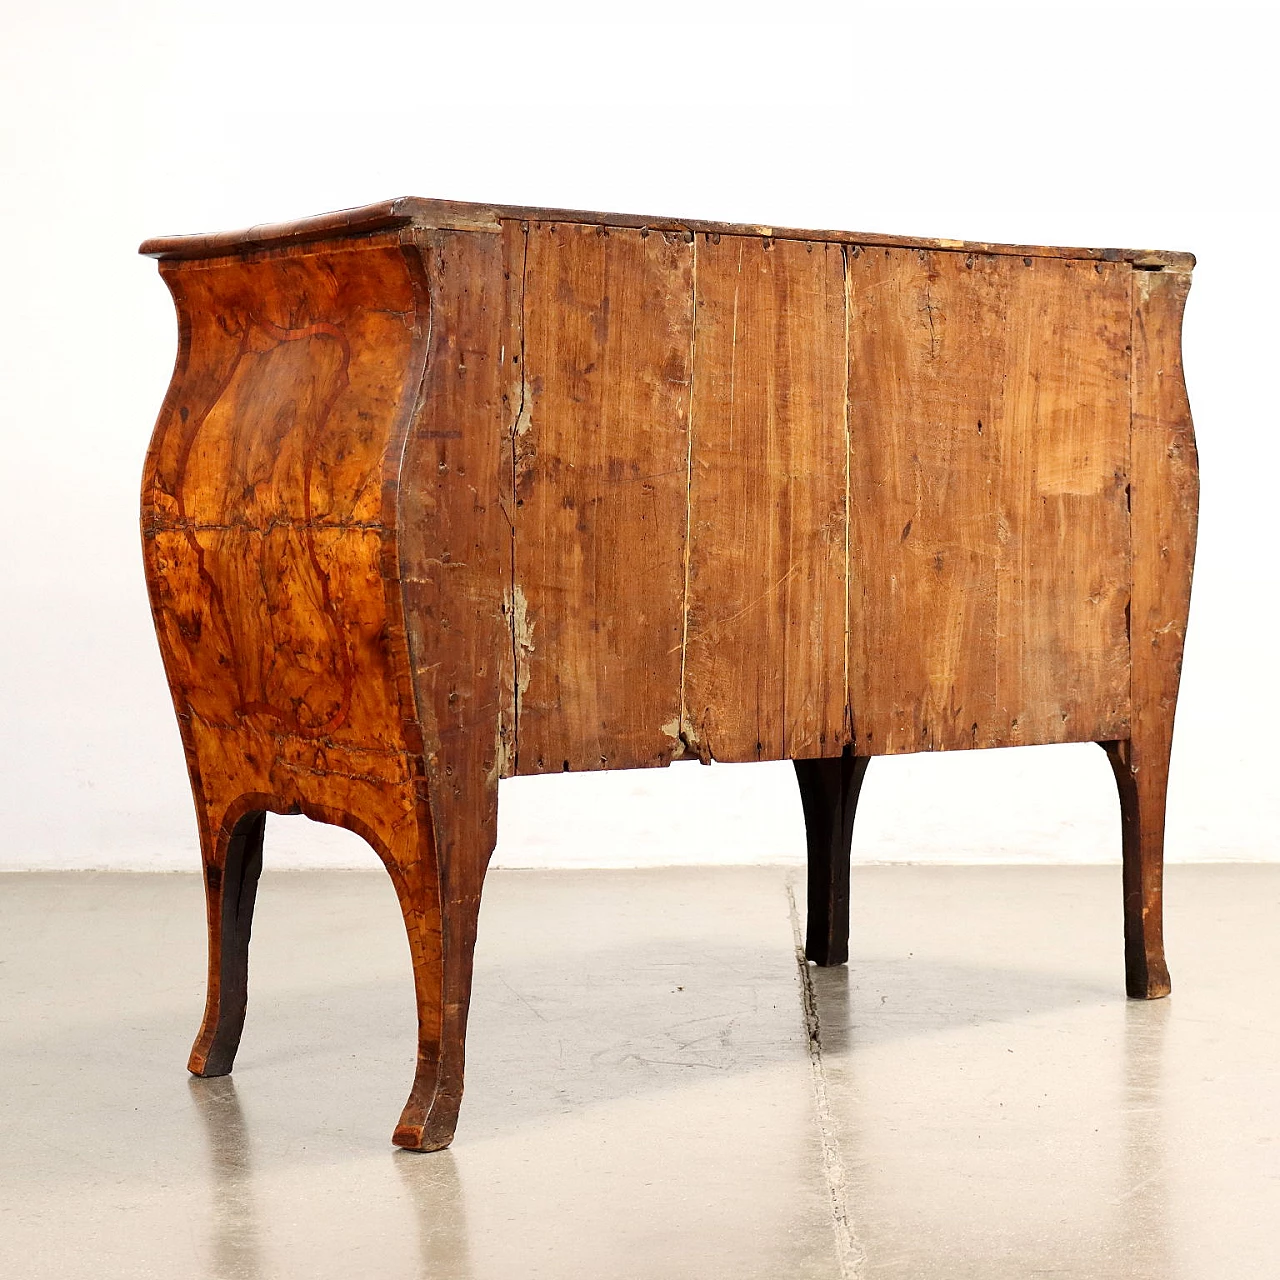 Walnut burl chest of drawers with rosewood fillets, 18th century 10